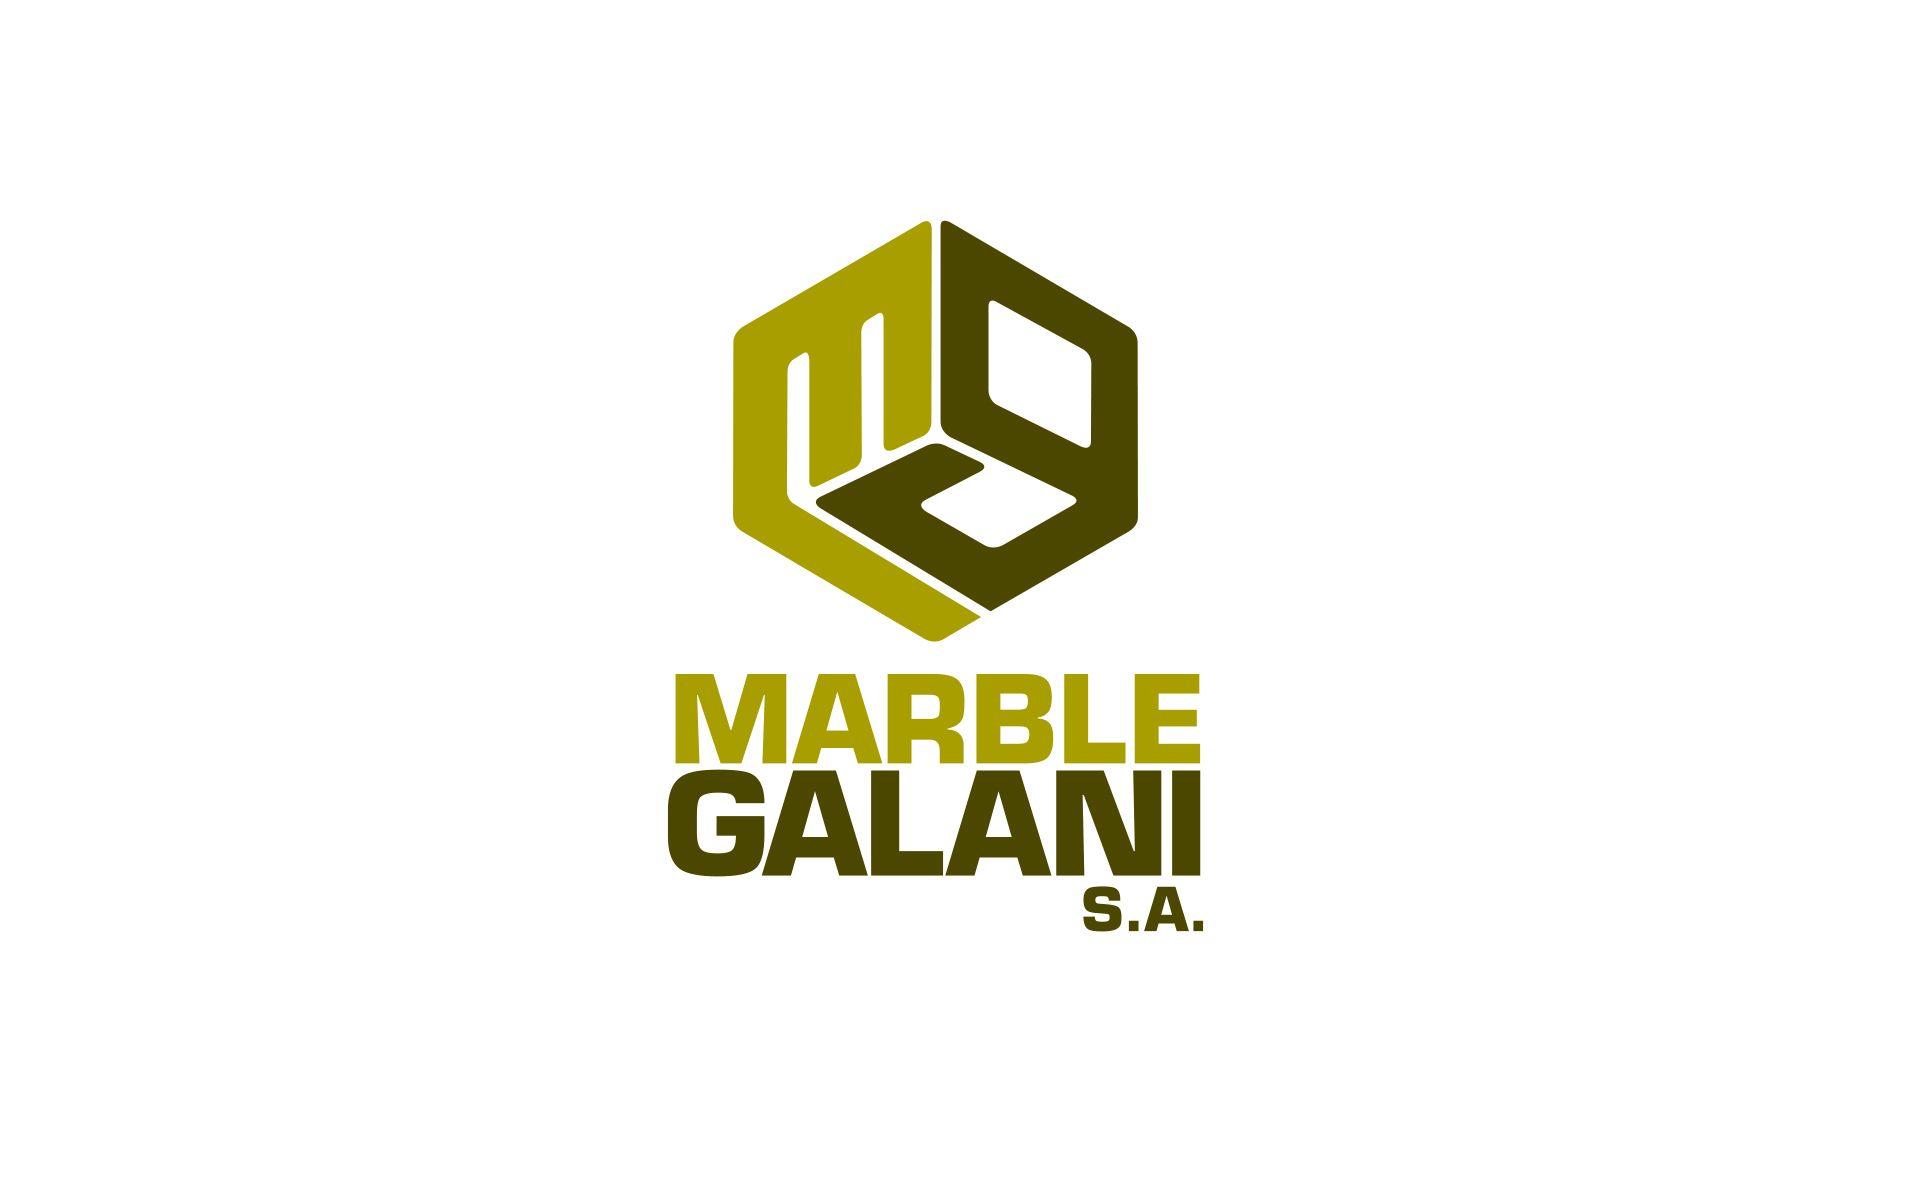 Using Marbles Starting with G Logo - Galanis Marble Design & Graphic Design, Motion